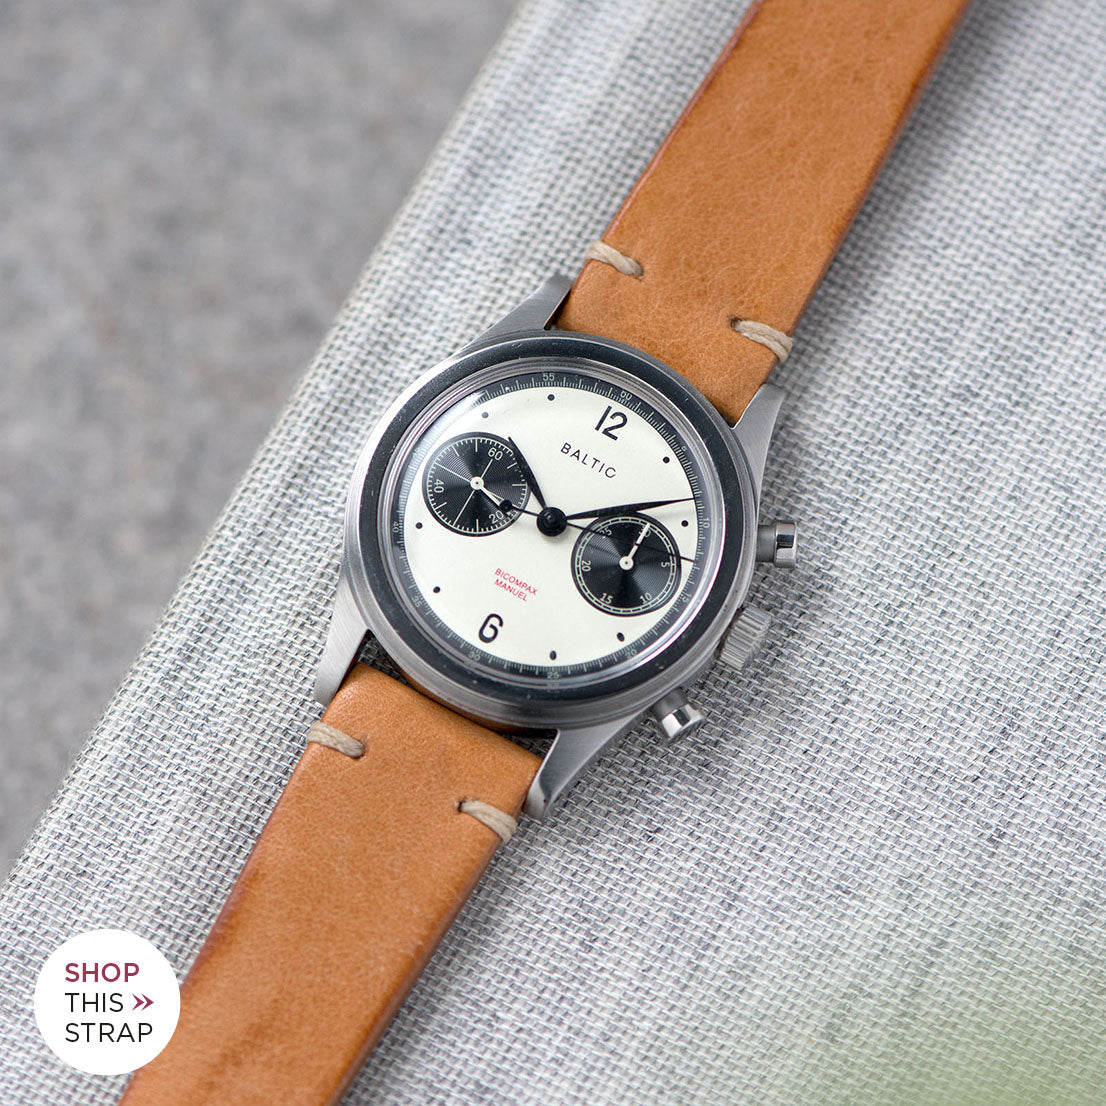 Bulang and Sons_Strap Guide_The Baltic-Chronograph-Panda-Limited-Edition_Caramel Brown Leather Watch Strap